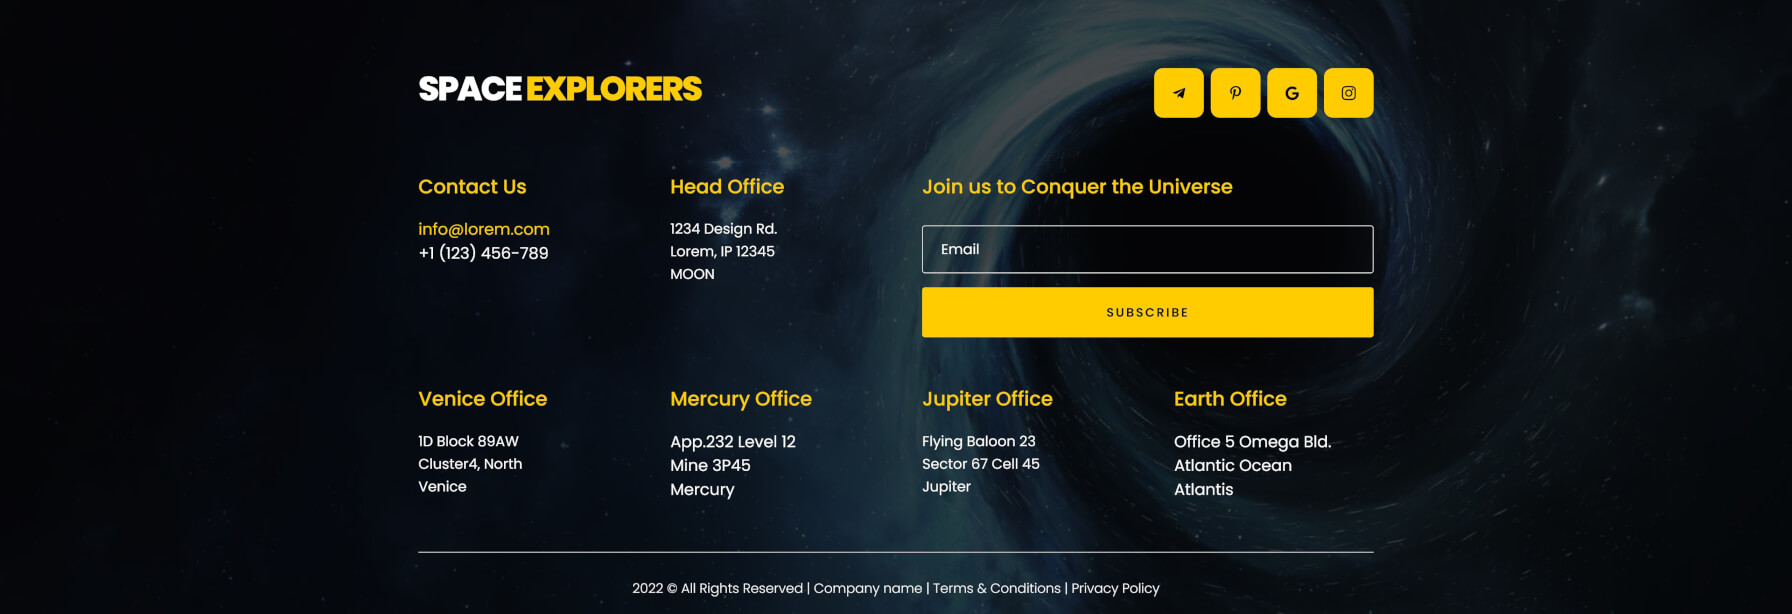 footer space explorers layout by deivi.expert